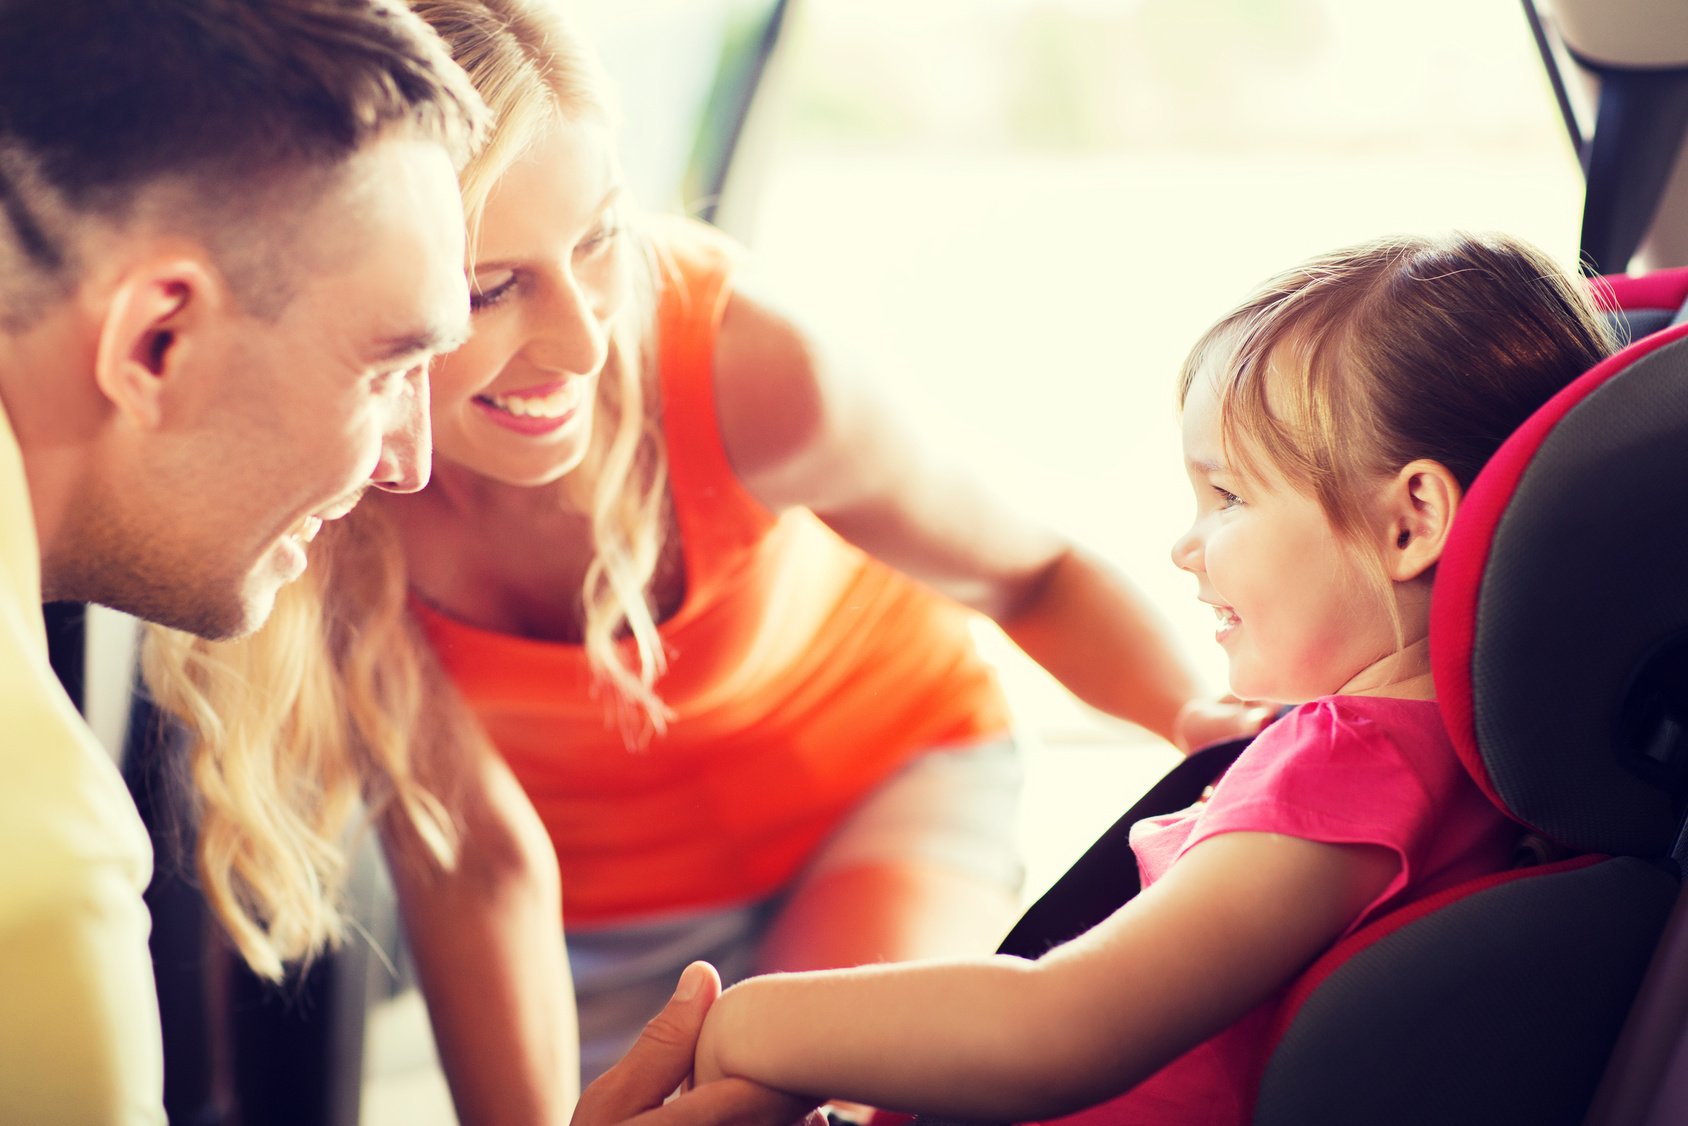 family, transport, safety, road trip and people concept - happy parents talking to little girl in baby car seat